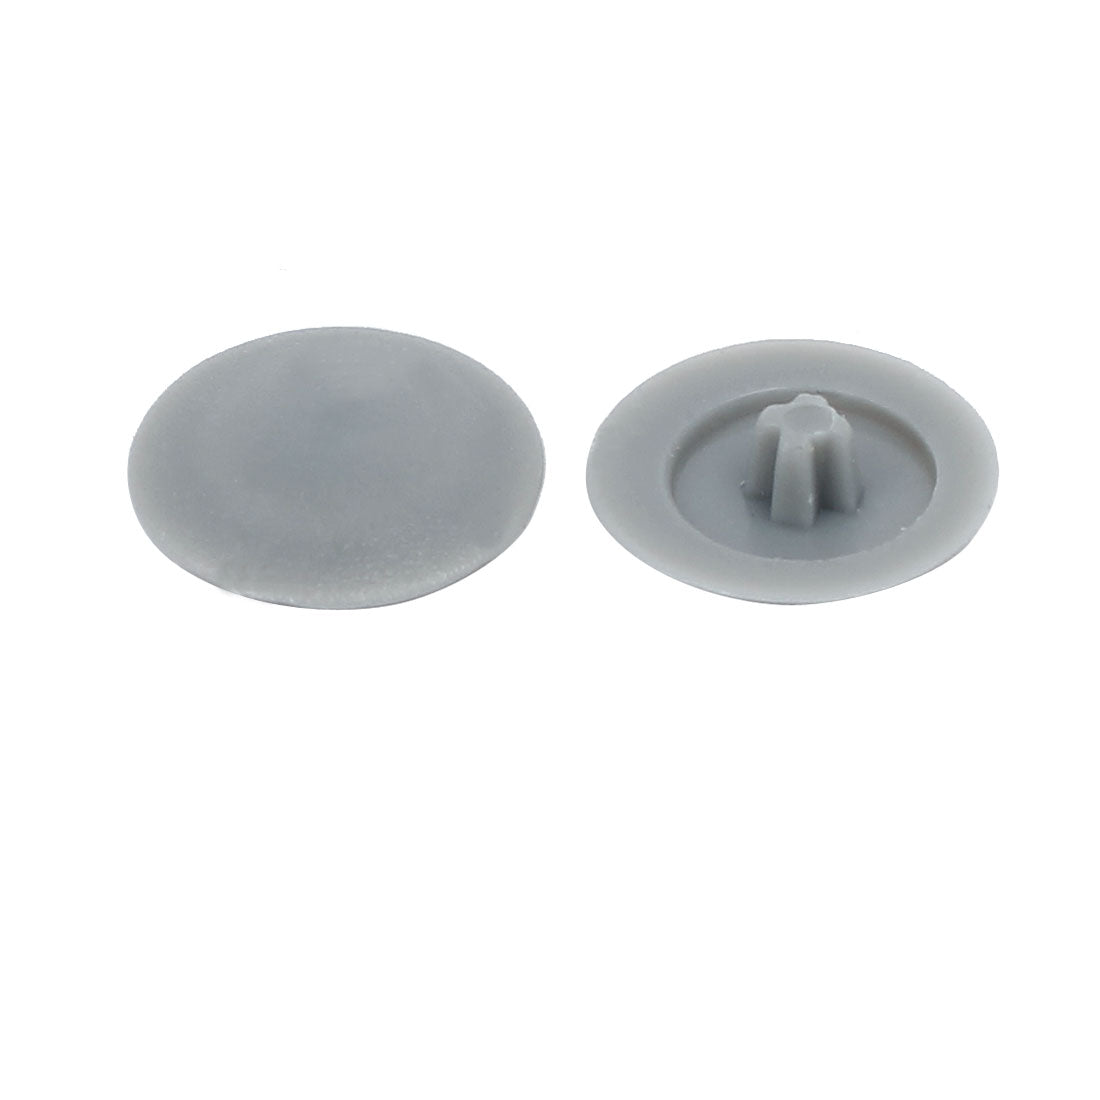 uxcell Uxcell 12mm Dia Plastic Phillips Screw Cap Hole Plugs Dust Proof Covers Gray 100pcs